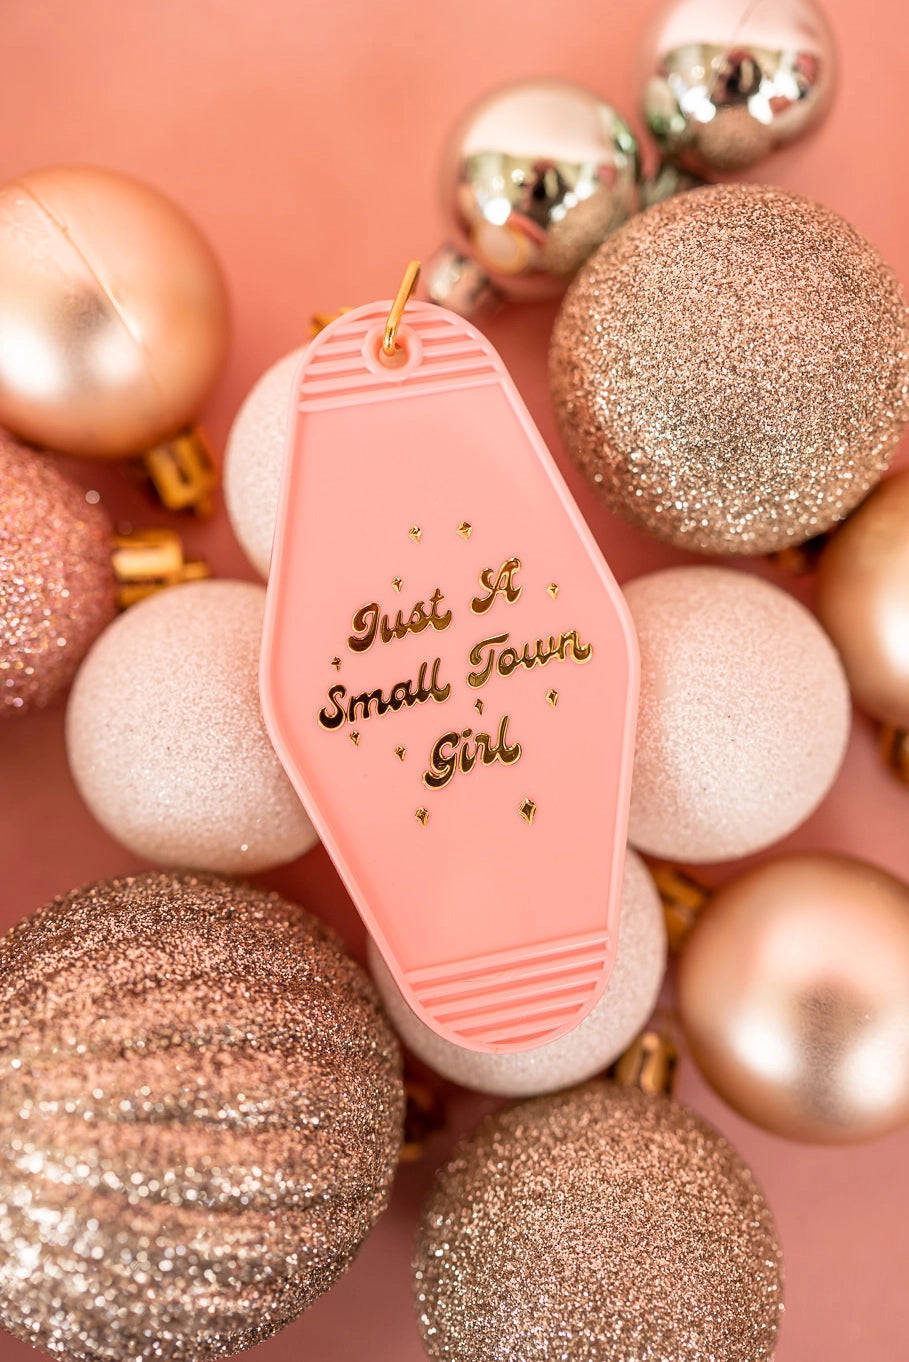 "Just A Small Town Girl" Vintage Style Motel Keychain - Pink